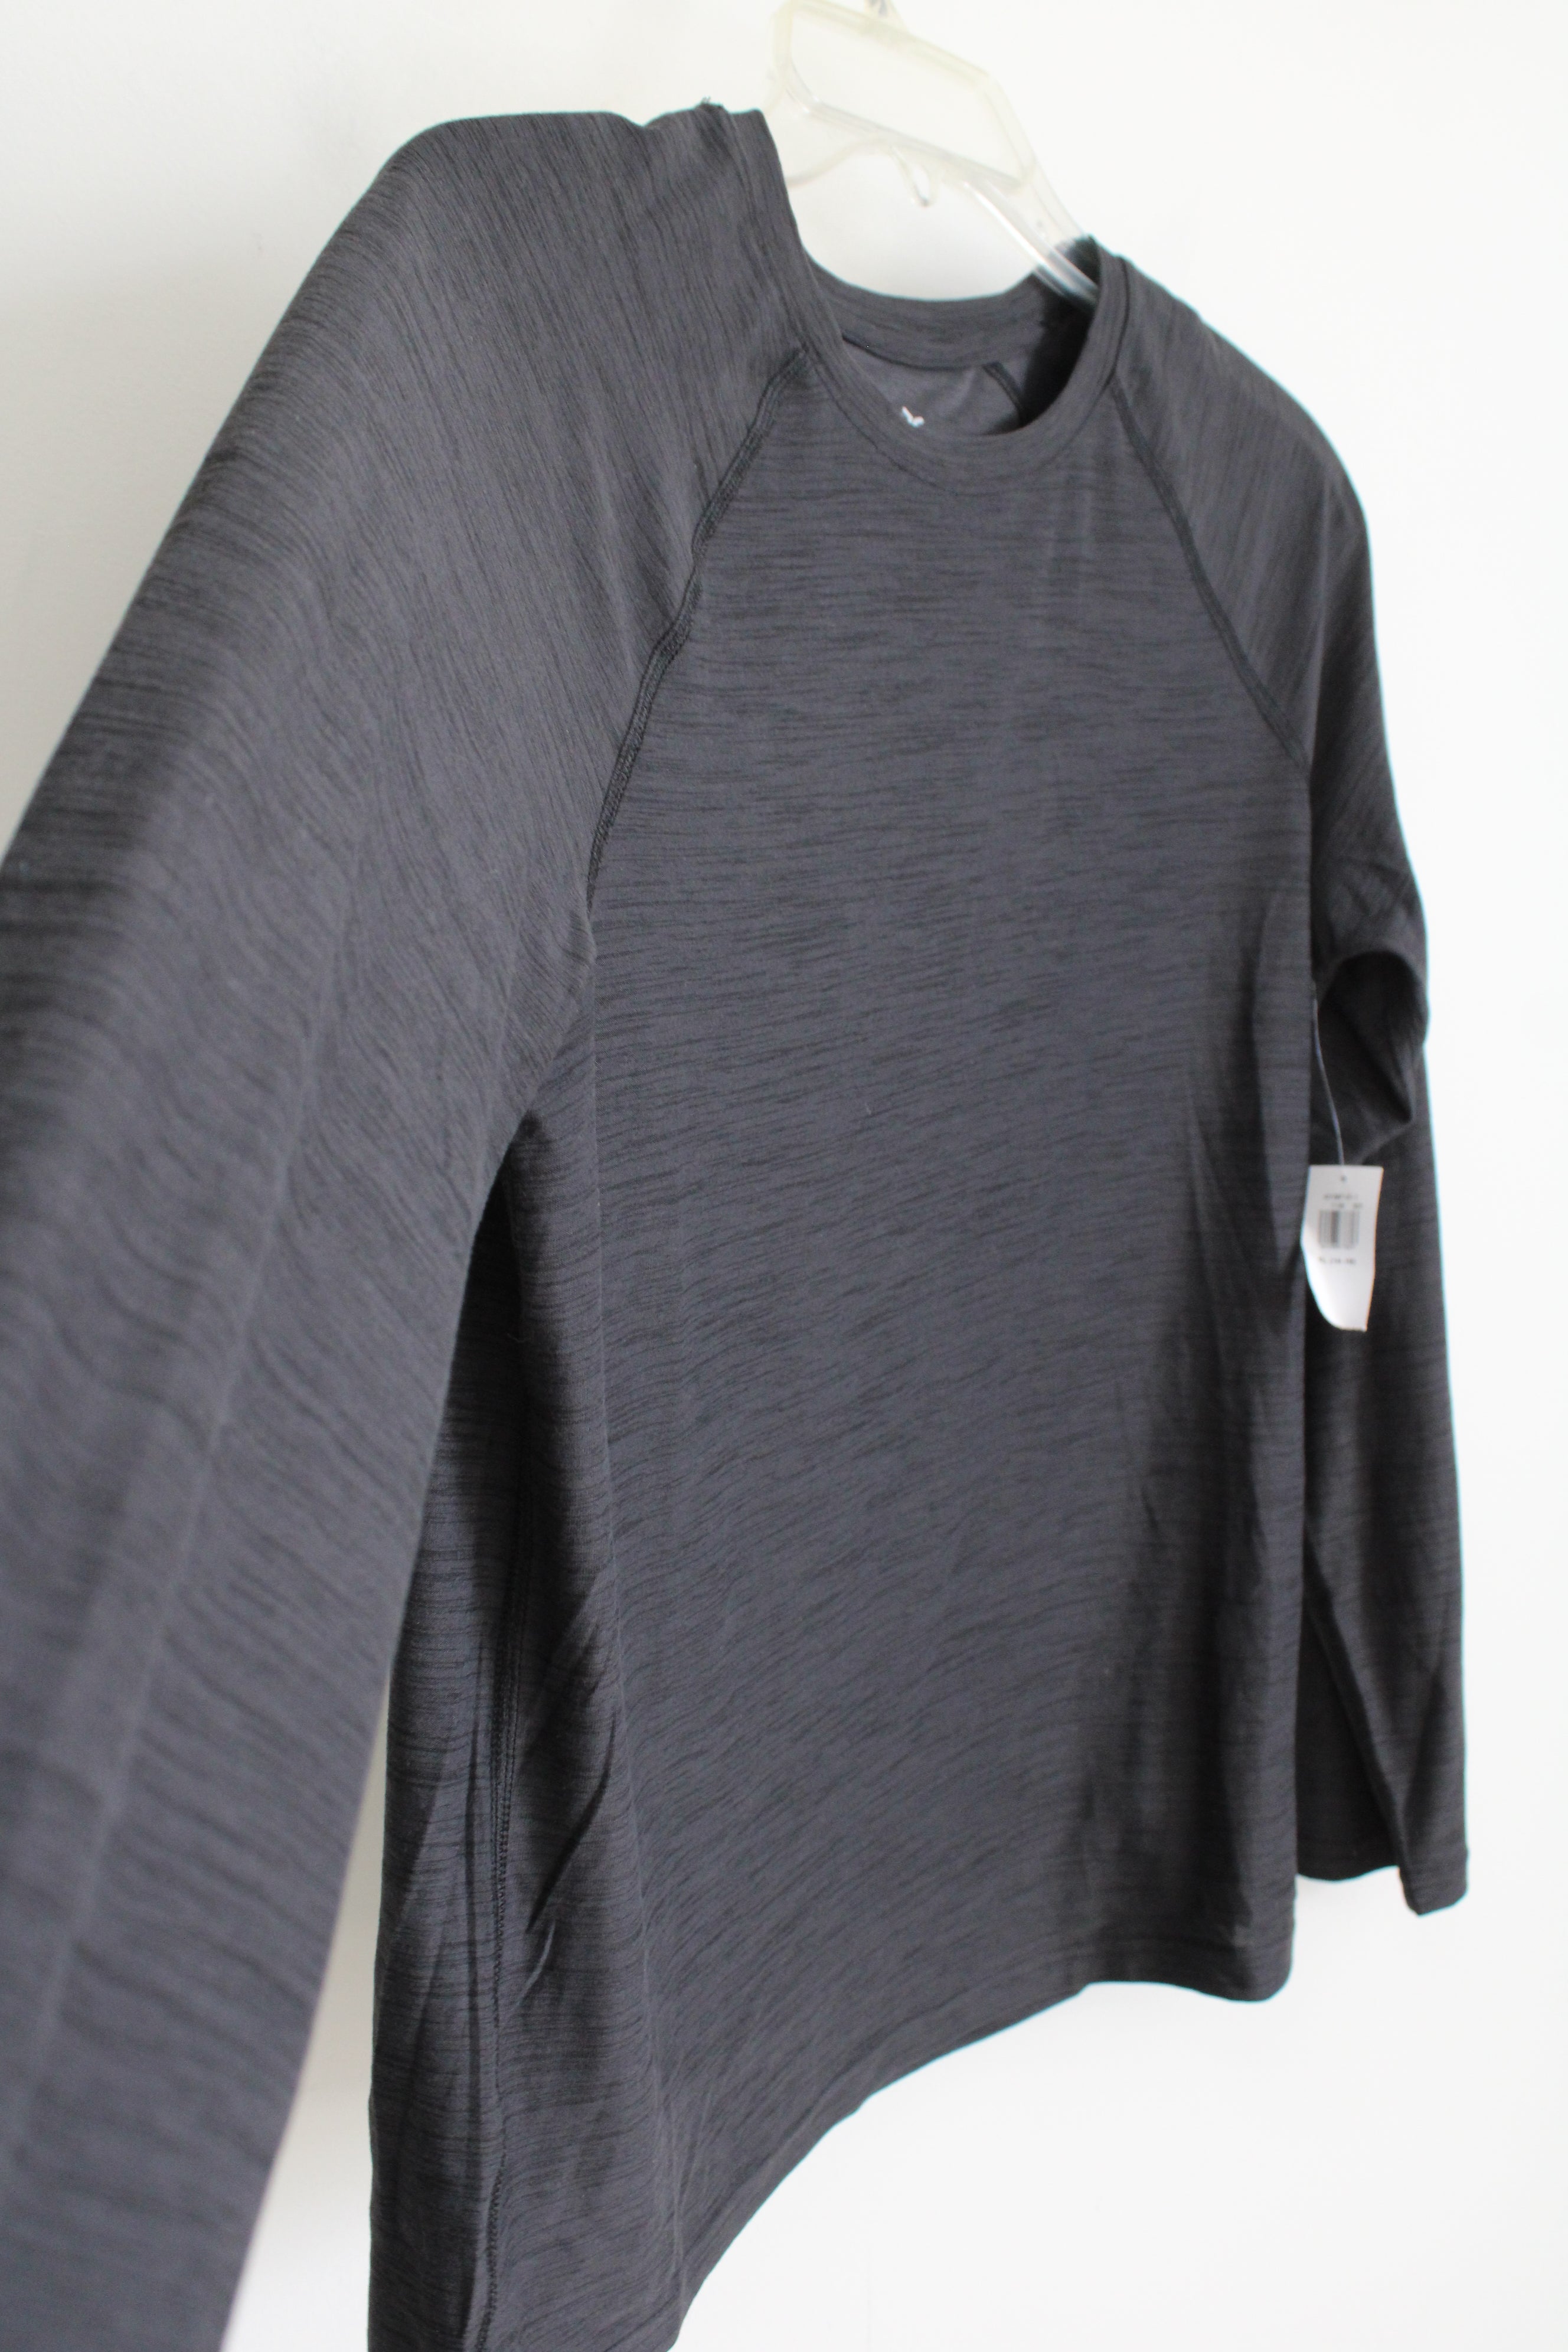 Old Navy Active Breathe On Gray Top | XL